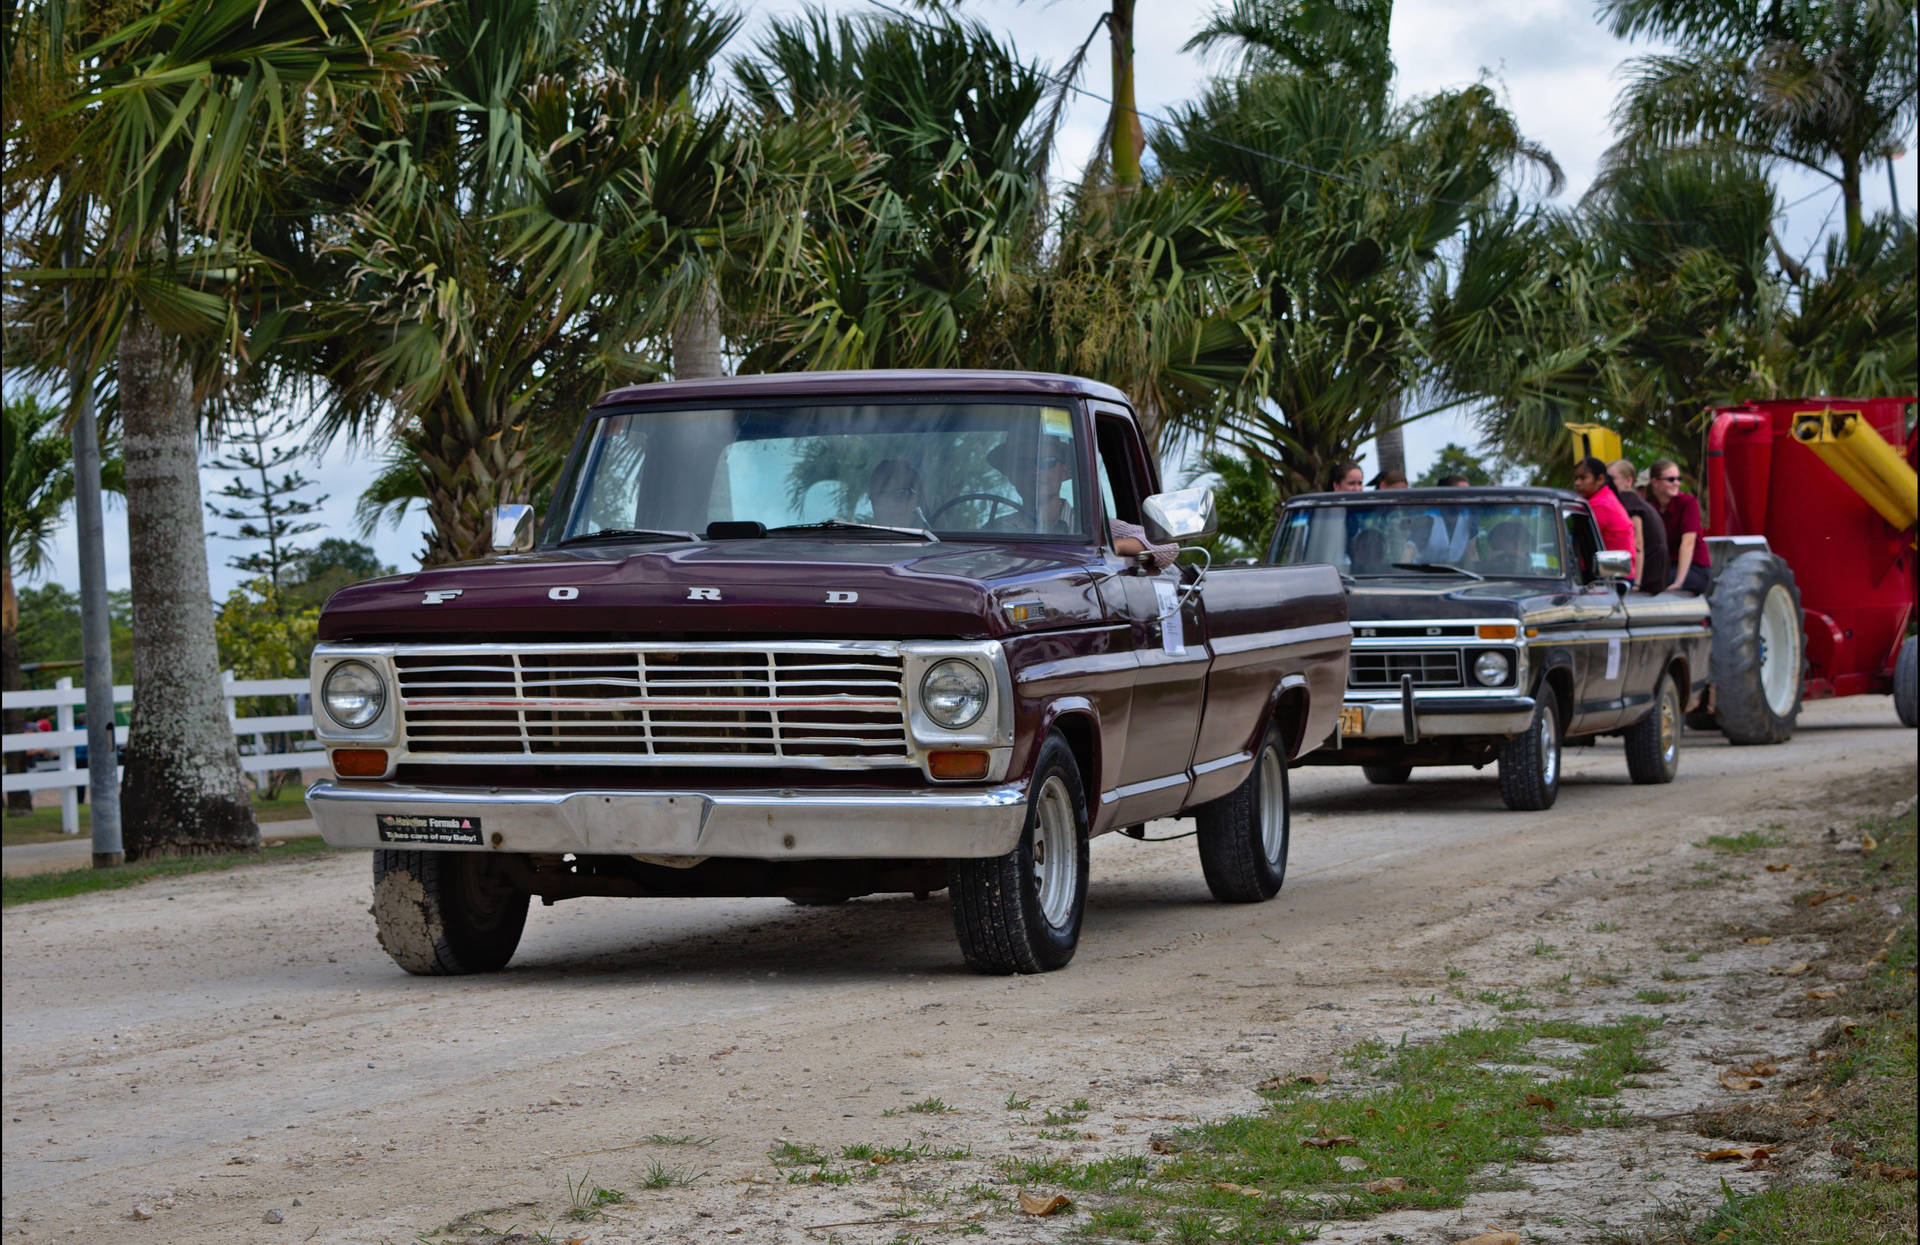 Timeless Beauty: A Pair Of Classic Ford Trucks